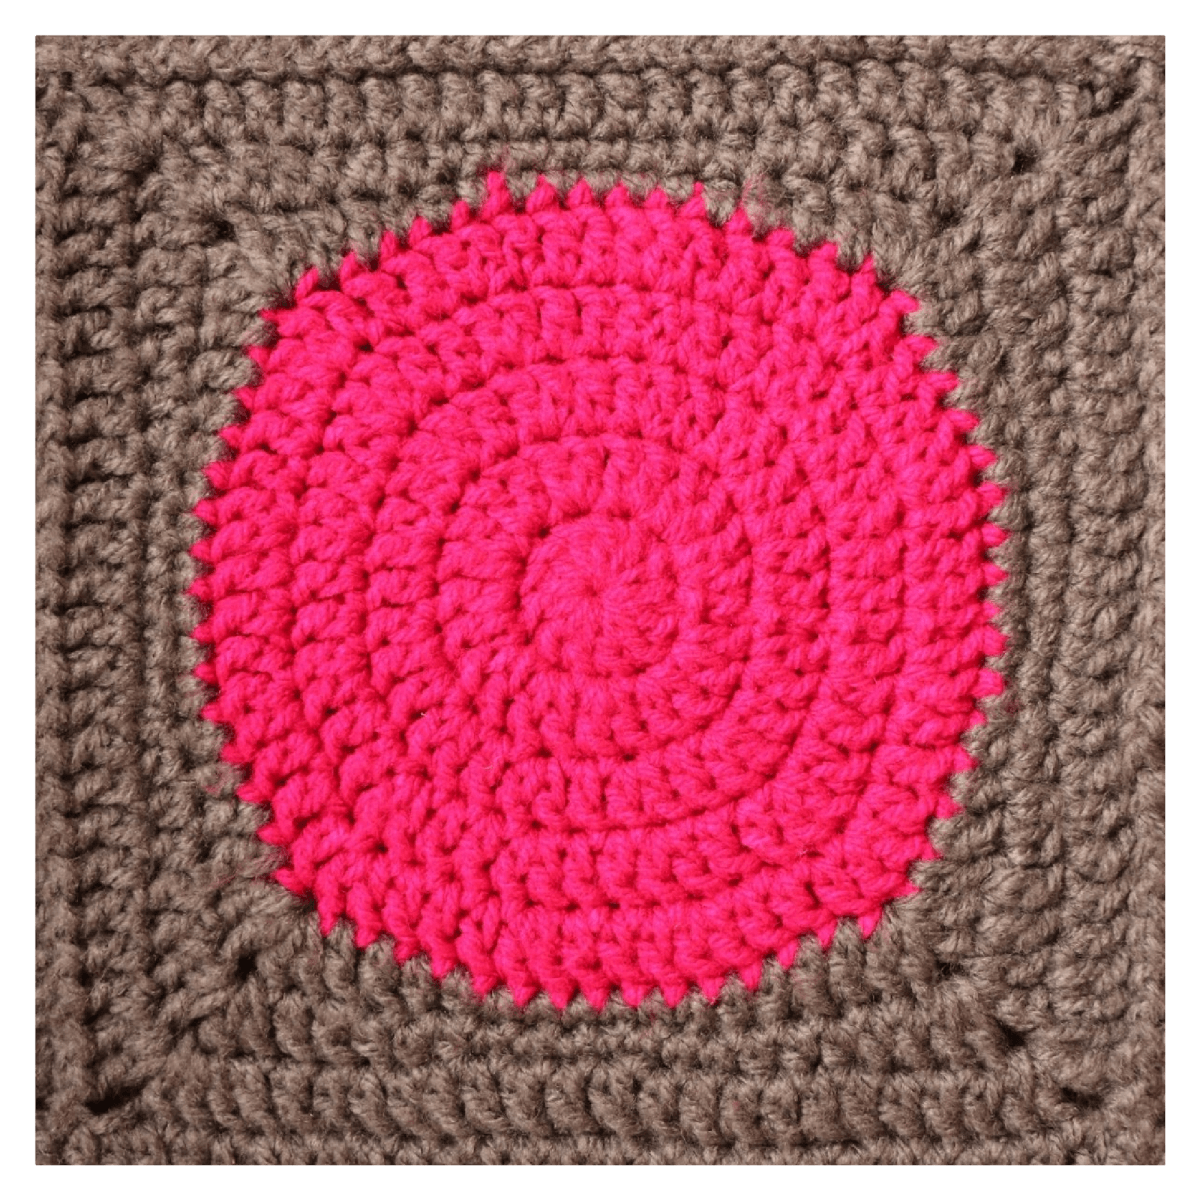 Making Circles into Squares - The Secret Yarnery